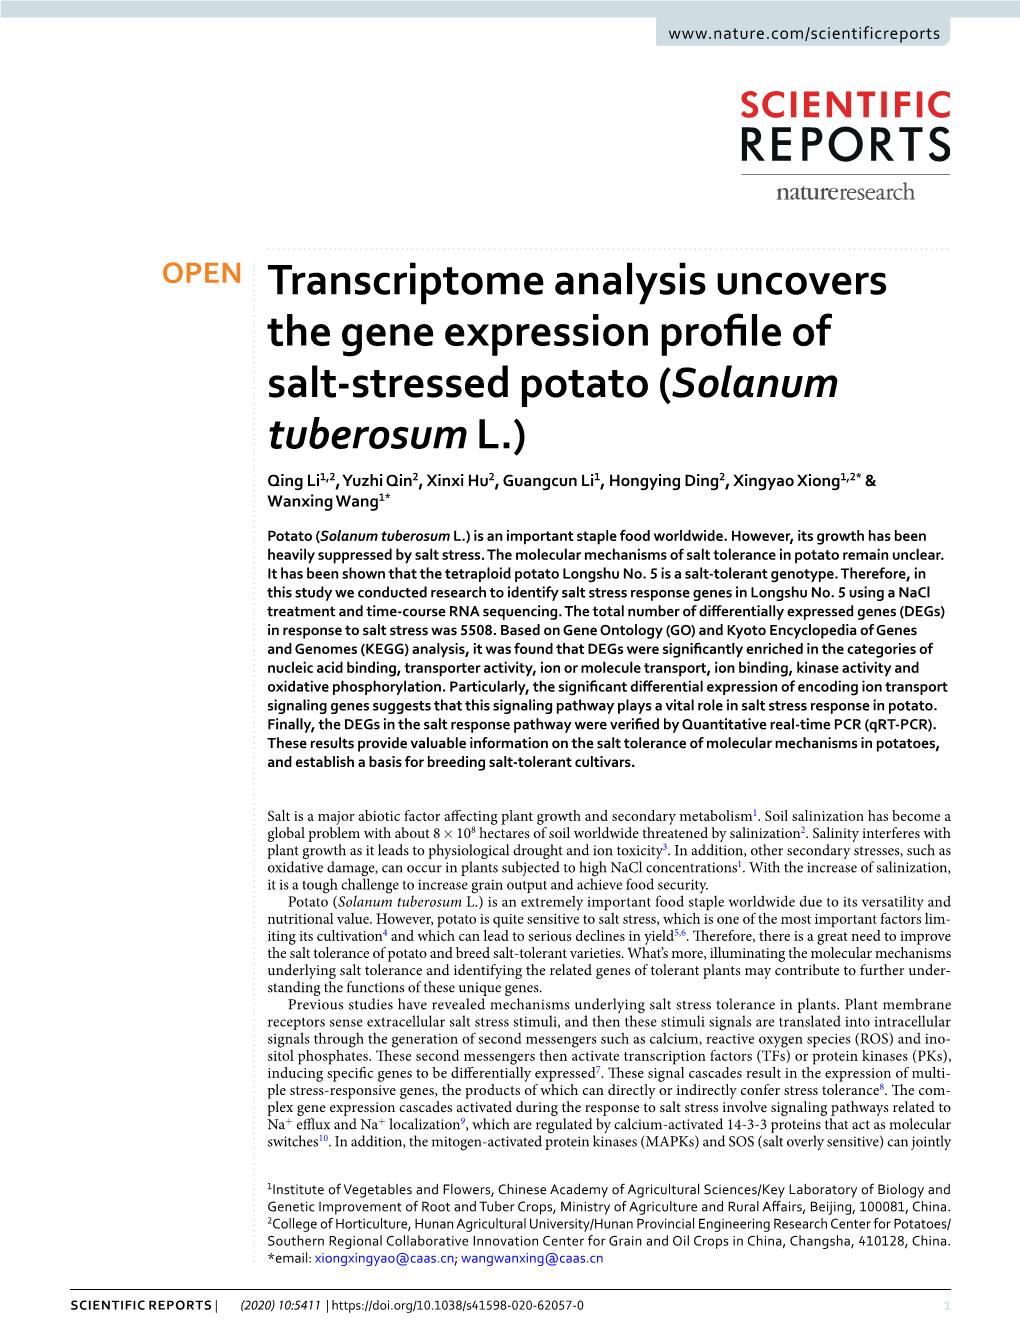 Transcriptome Analysis Uncovers the Gene Expression Profile Of